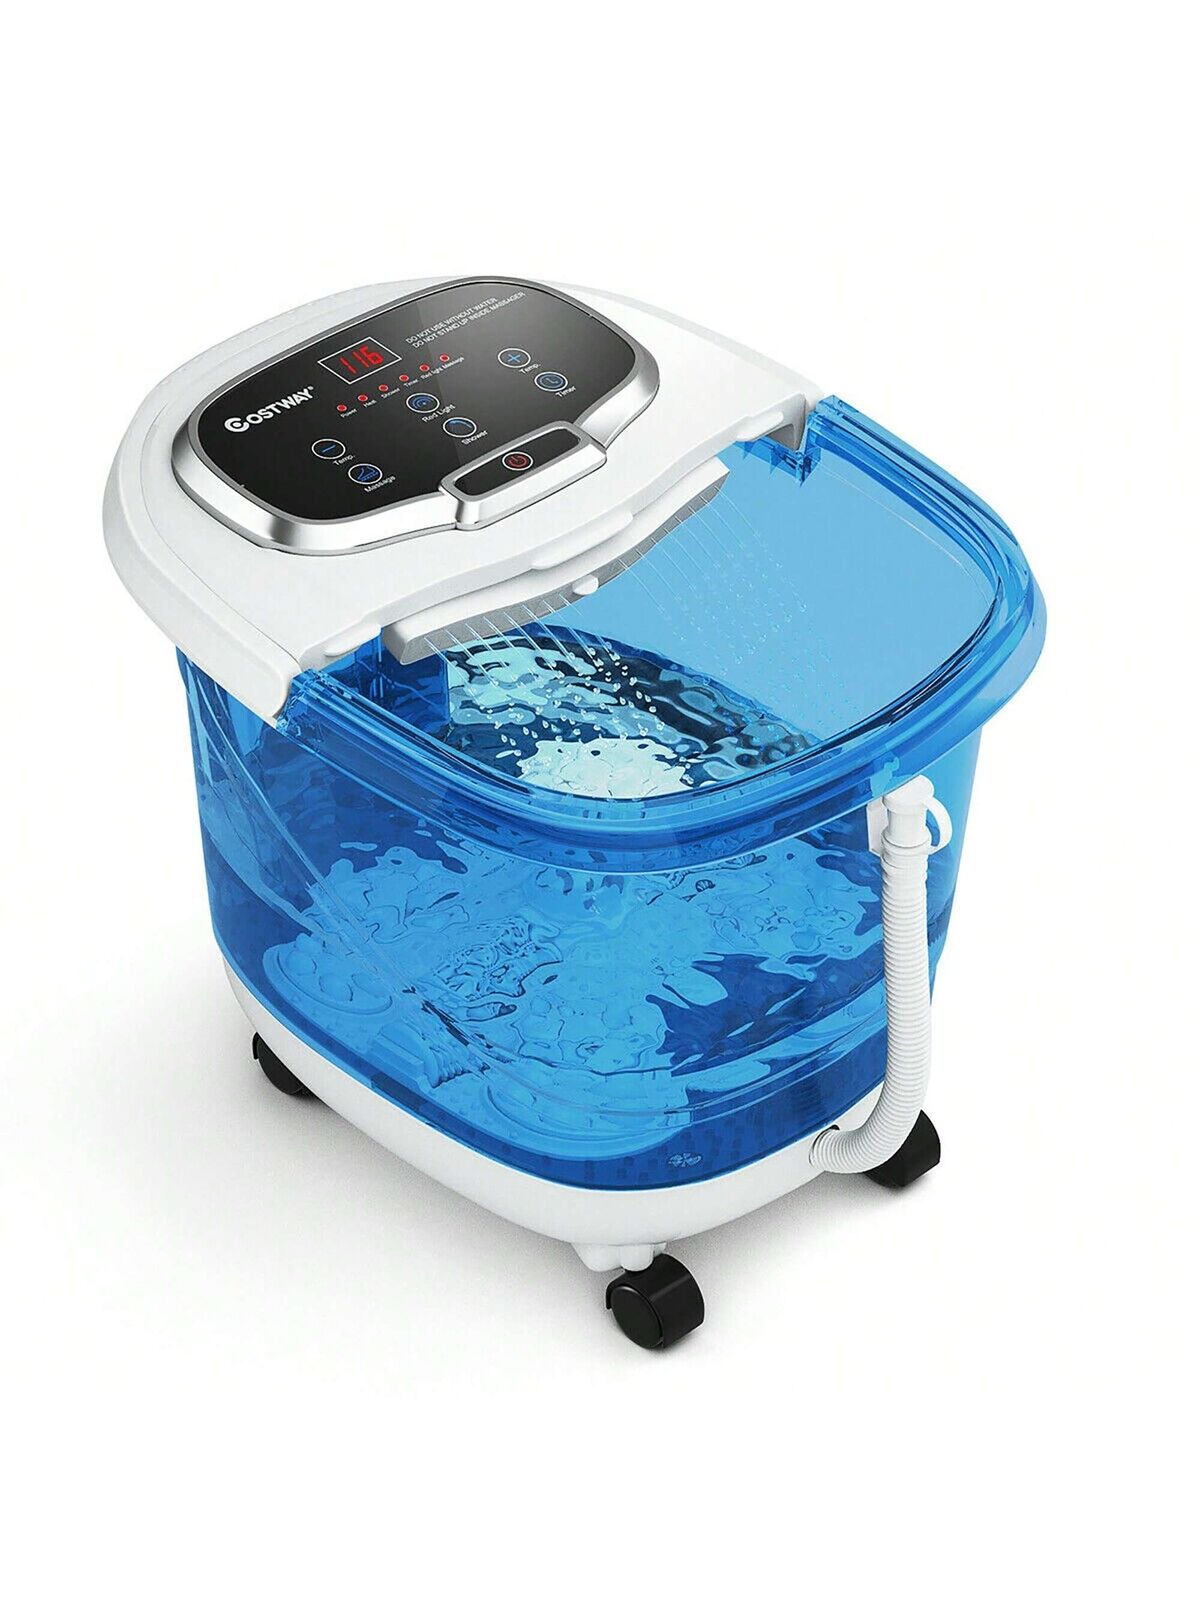 Costway Portable Foot Spa Bath Motorized Massager Electric,Household Appliances